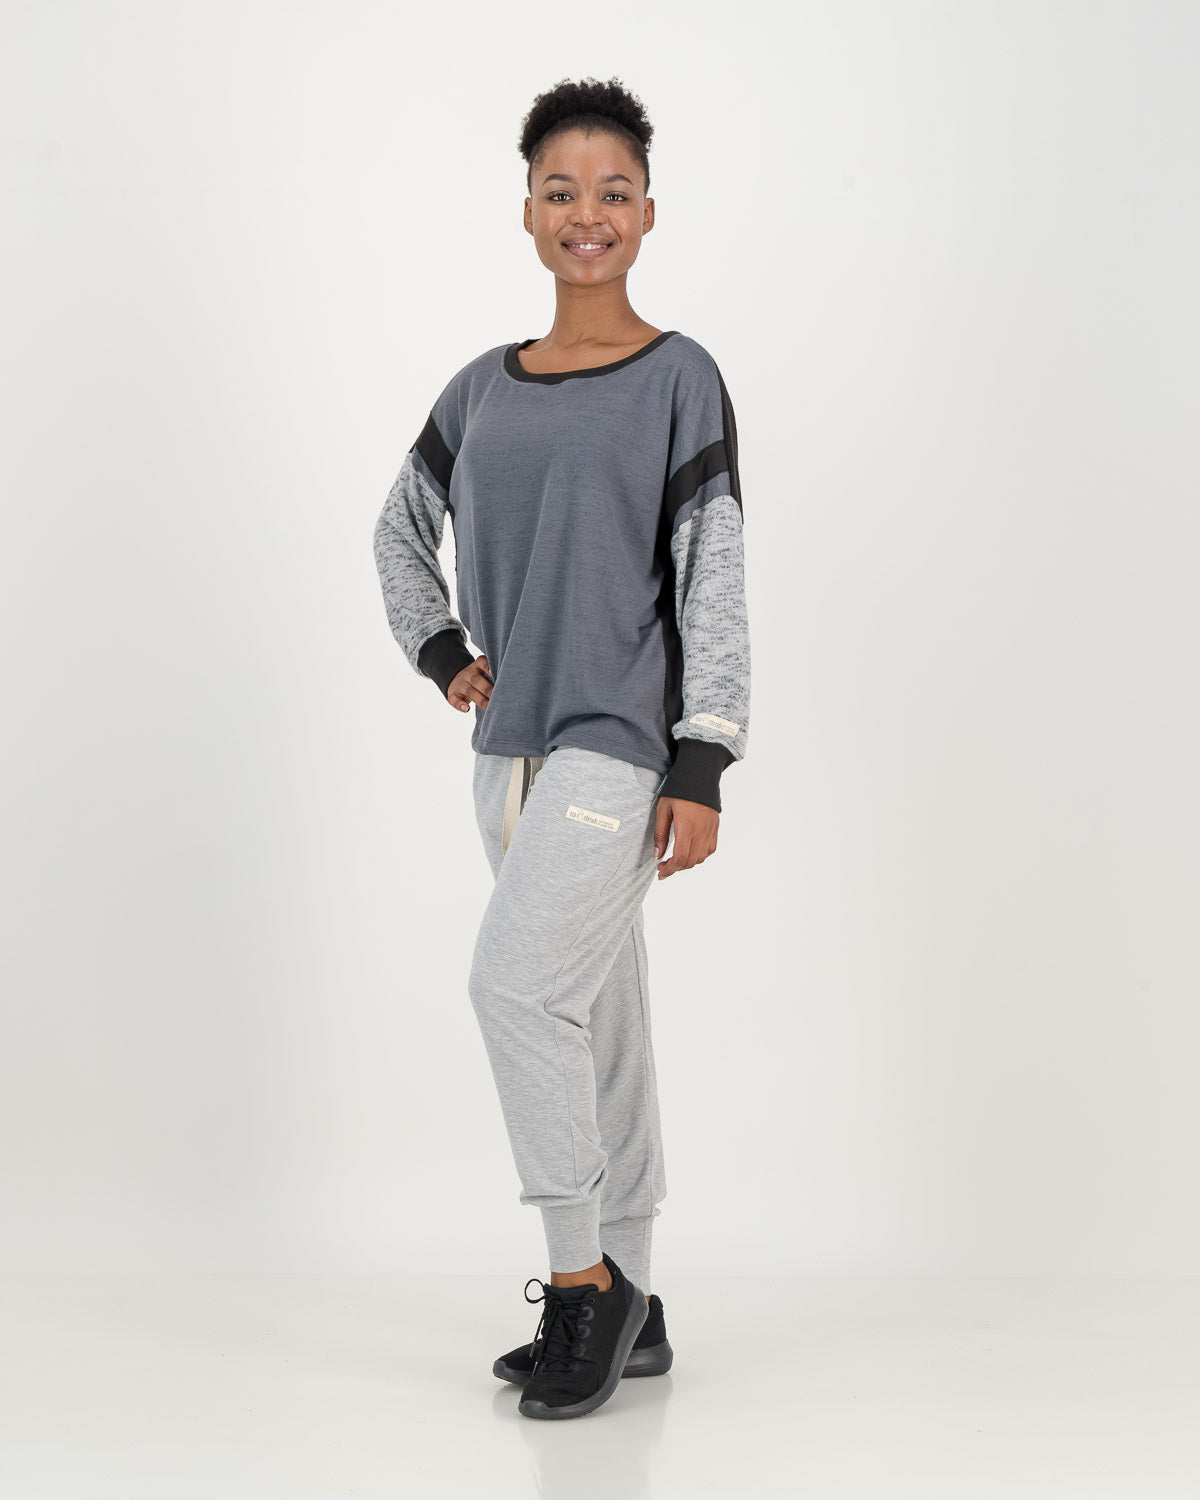 Grey melange pants, heather pants, we love these Comfy Pants as much as you do! The comfiest pants in the world that totally live up to their name! Natural and breathable viscose lycra, that feels soft against your skin, with a very flattering draping effect, yoga pants, casual wear, active wear, wear it walking, travel pants, loungewear, it is good for you, it's good for the earth, Eco Threads Clothing, made in South Africa